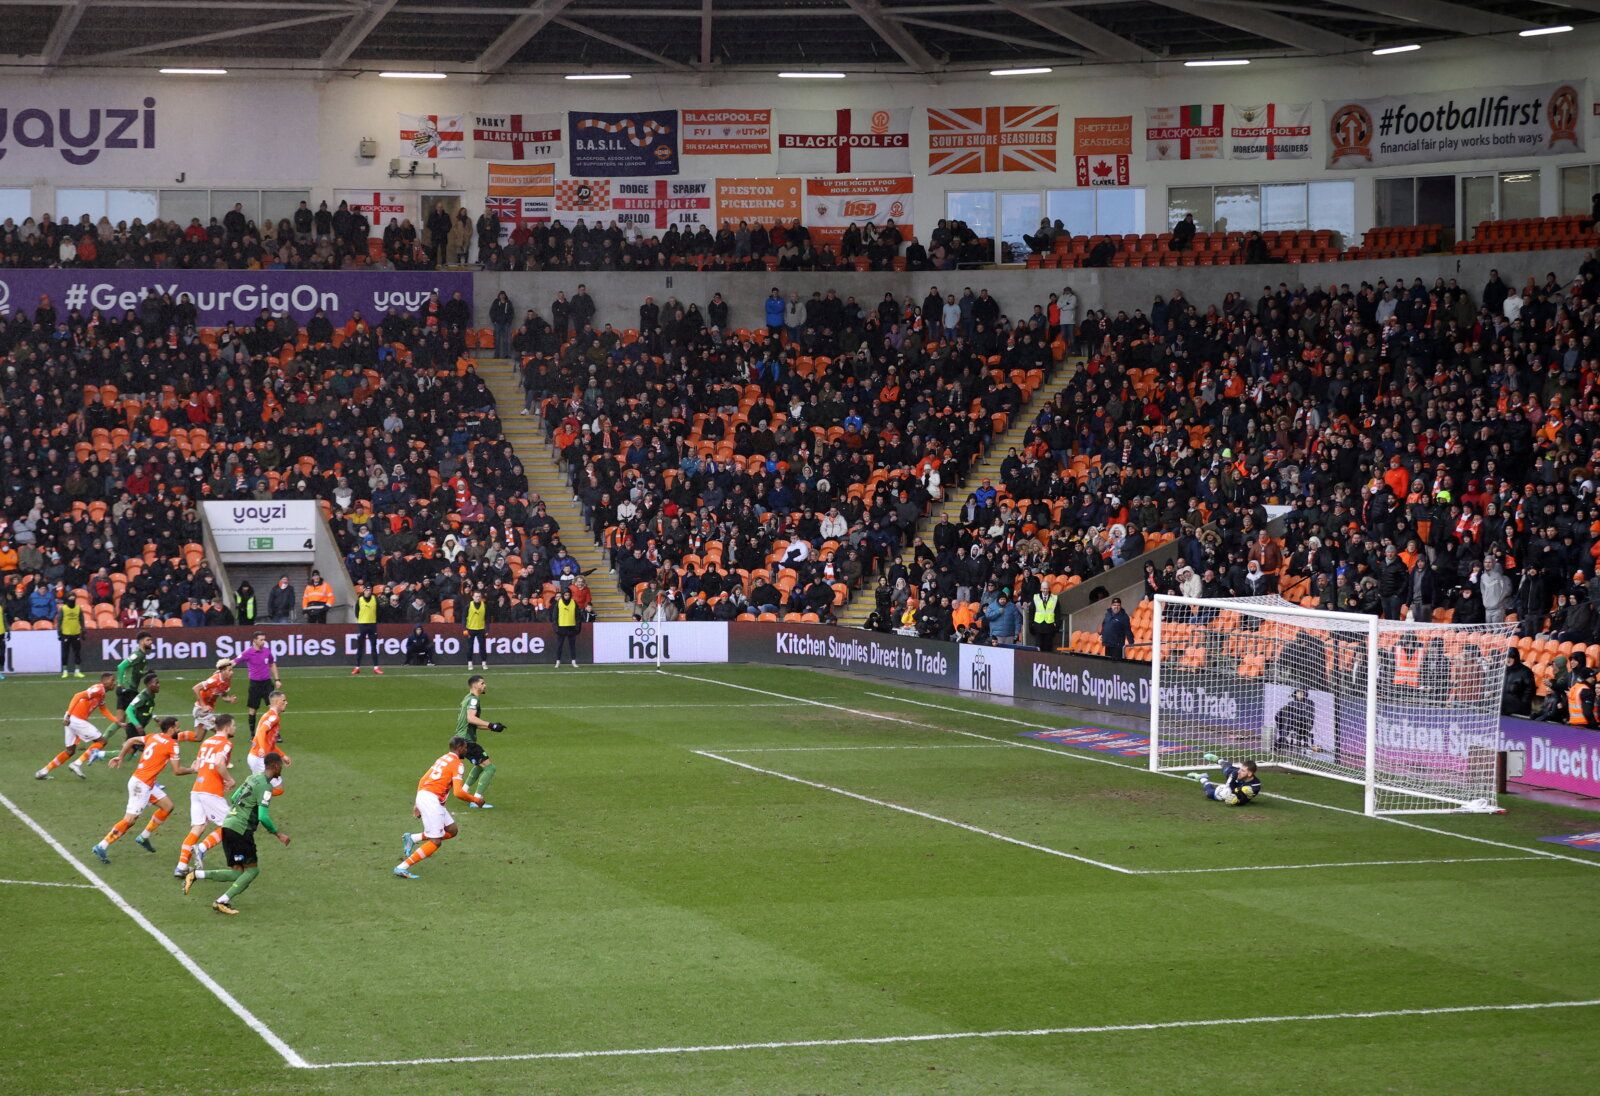 Soccer Football - Championship - Blackpool v AFC Bournemouth - Bloomfield Road, Blackpool, Britain - February 12, 2022  Blackpool's Dan Grimshaw saves Bournemouth's Dominic Solanke penalty     Action Images/Molly Darlington  EDITORIAL USE ONLY. No use with unauthorized audio, video, data, fixture lists, club/league logos or 